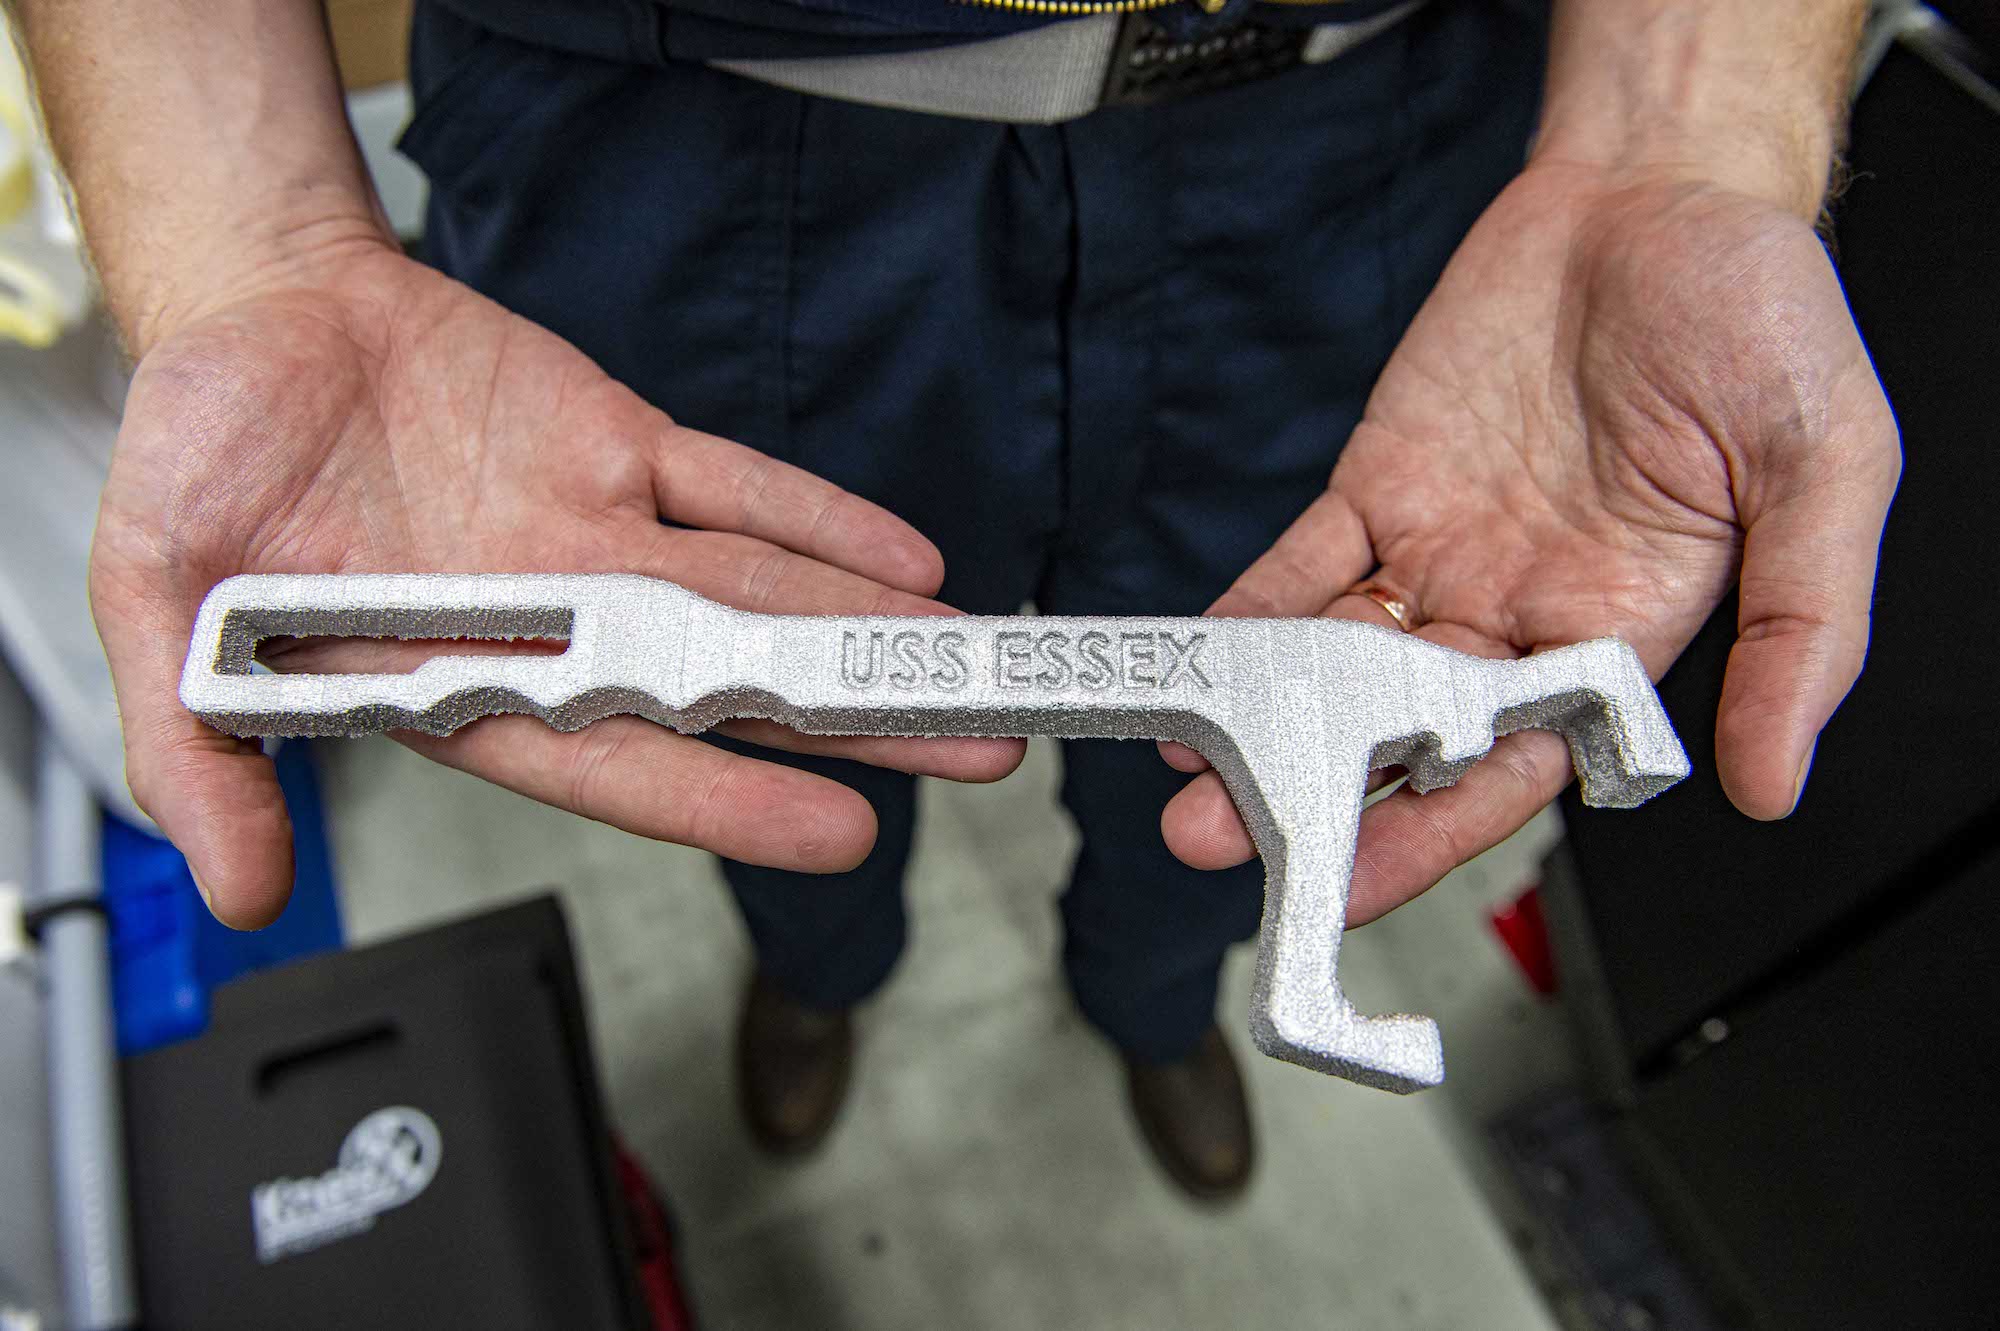 This wrench was printed at sea.